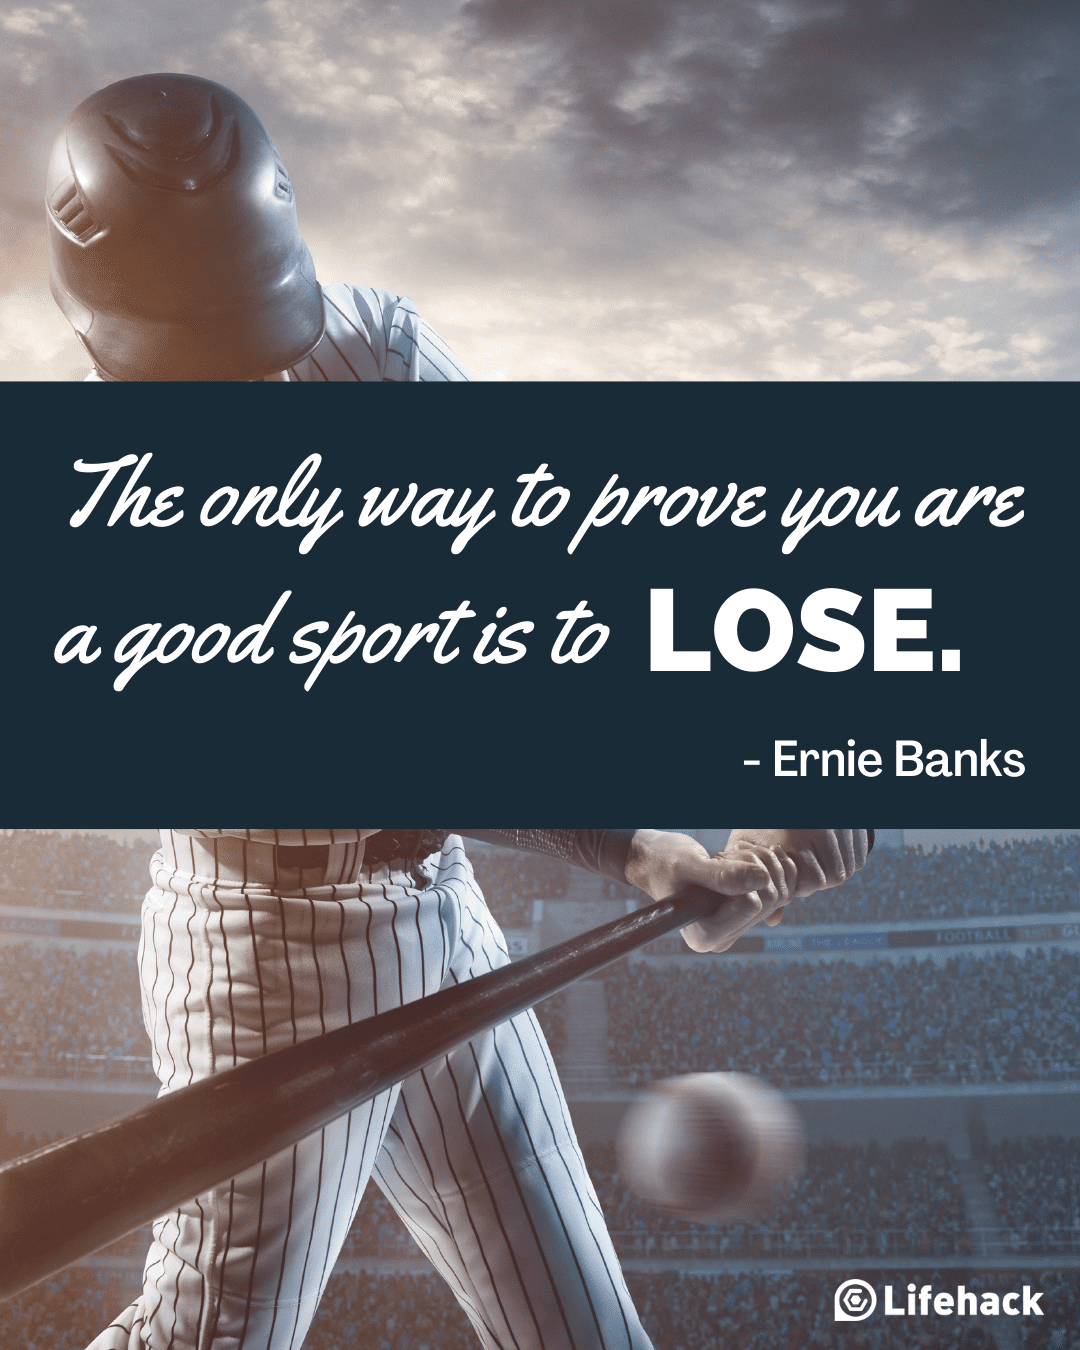 25 All-Time Best Inspirational Sports Quotes To Get You Going